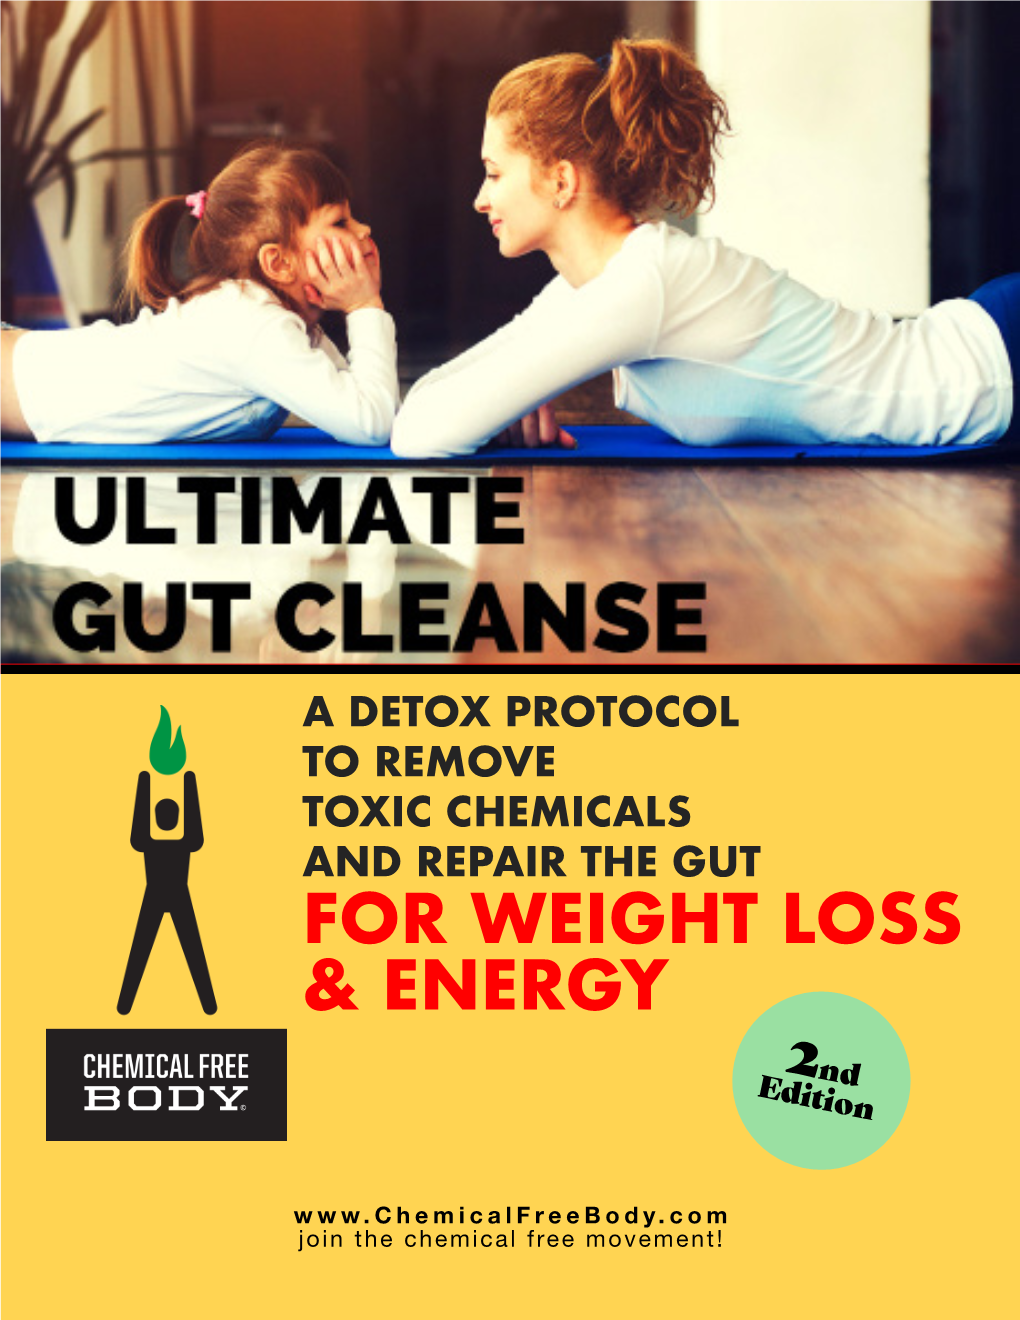 For Weight Loss & Energy